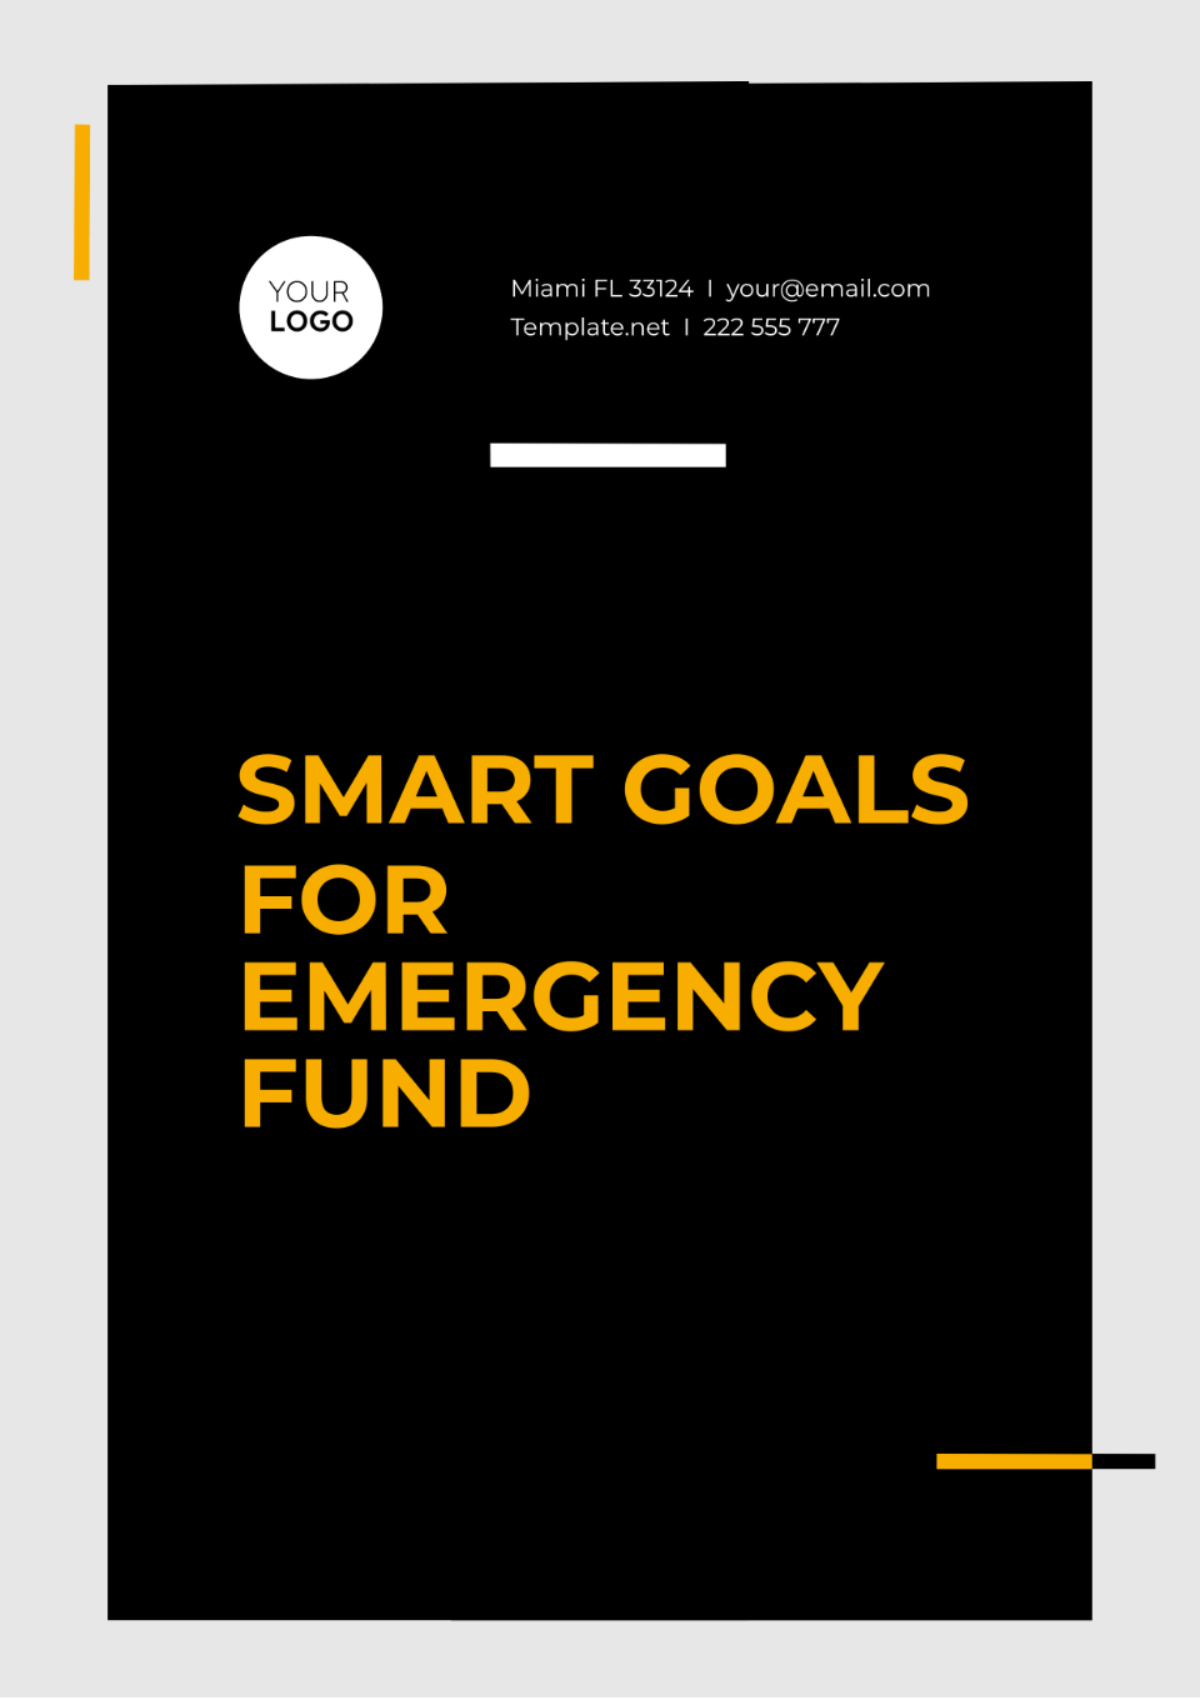 SMART Goals Template for Emergency Fund